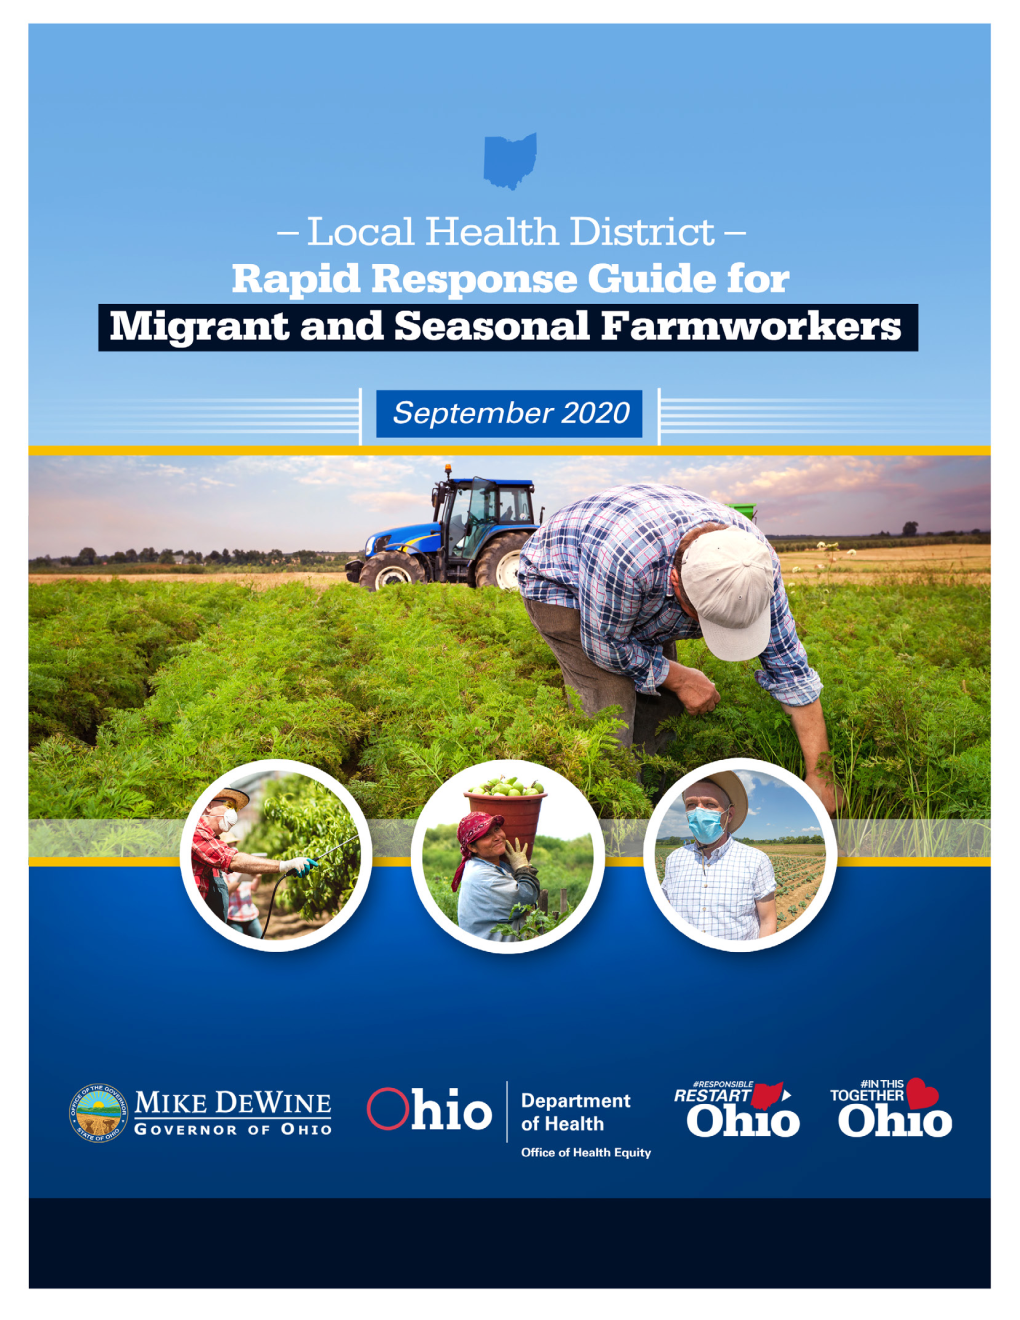 Rapid Response Guide for Migrant and Seasonal Farm Workers